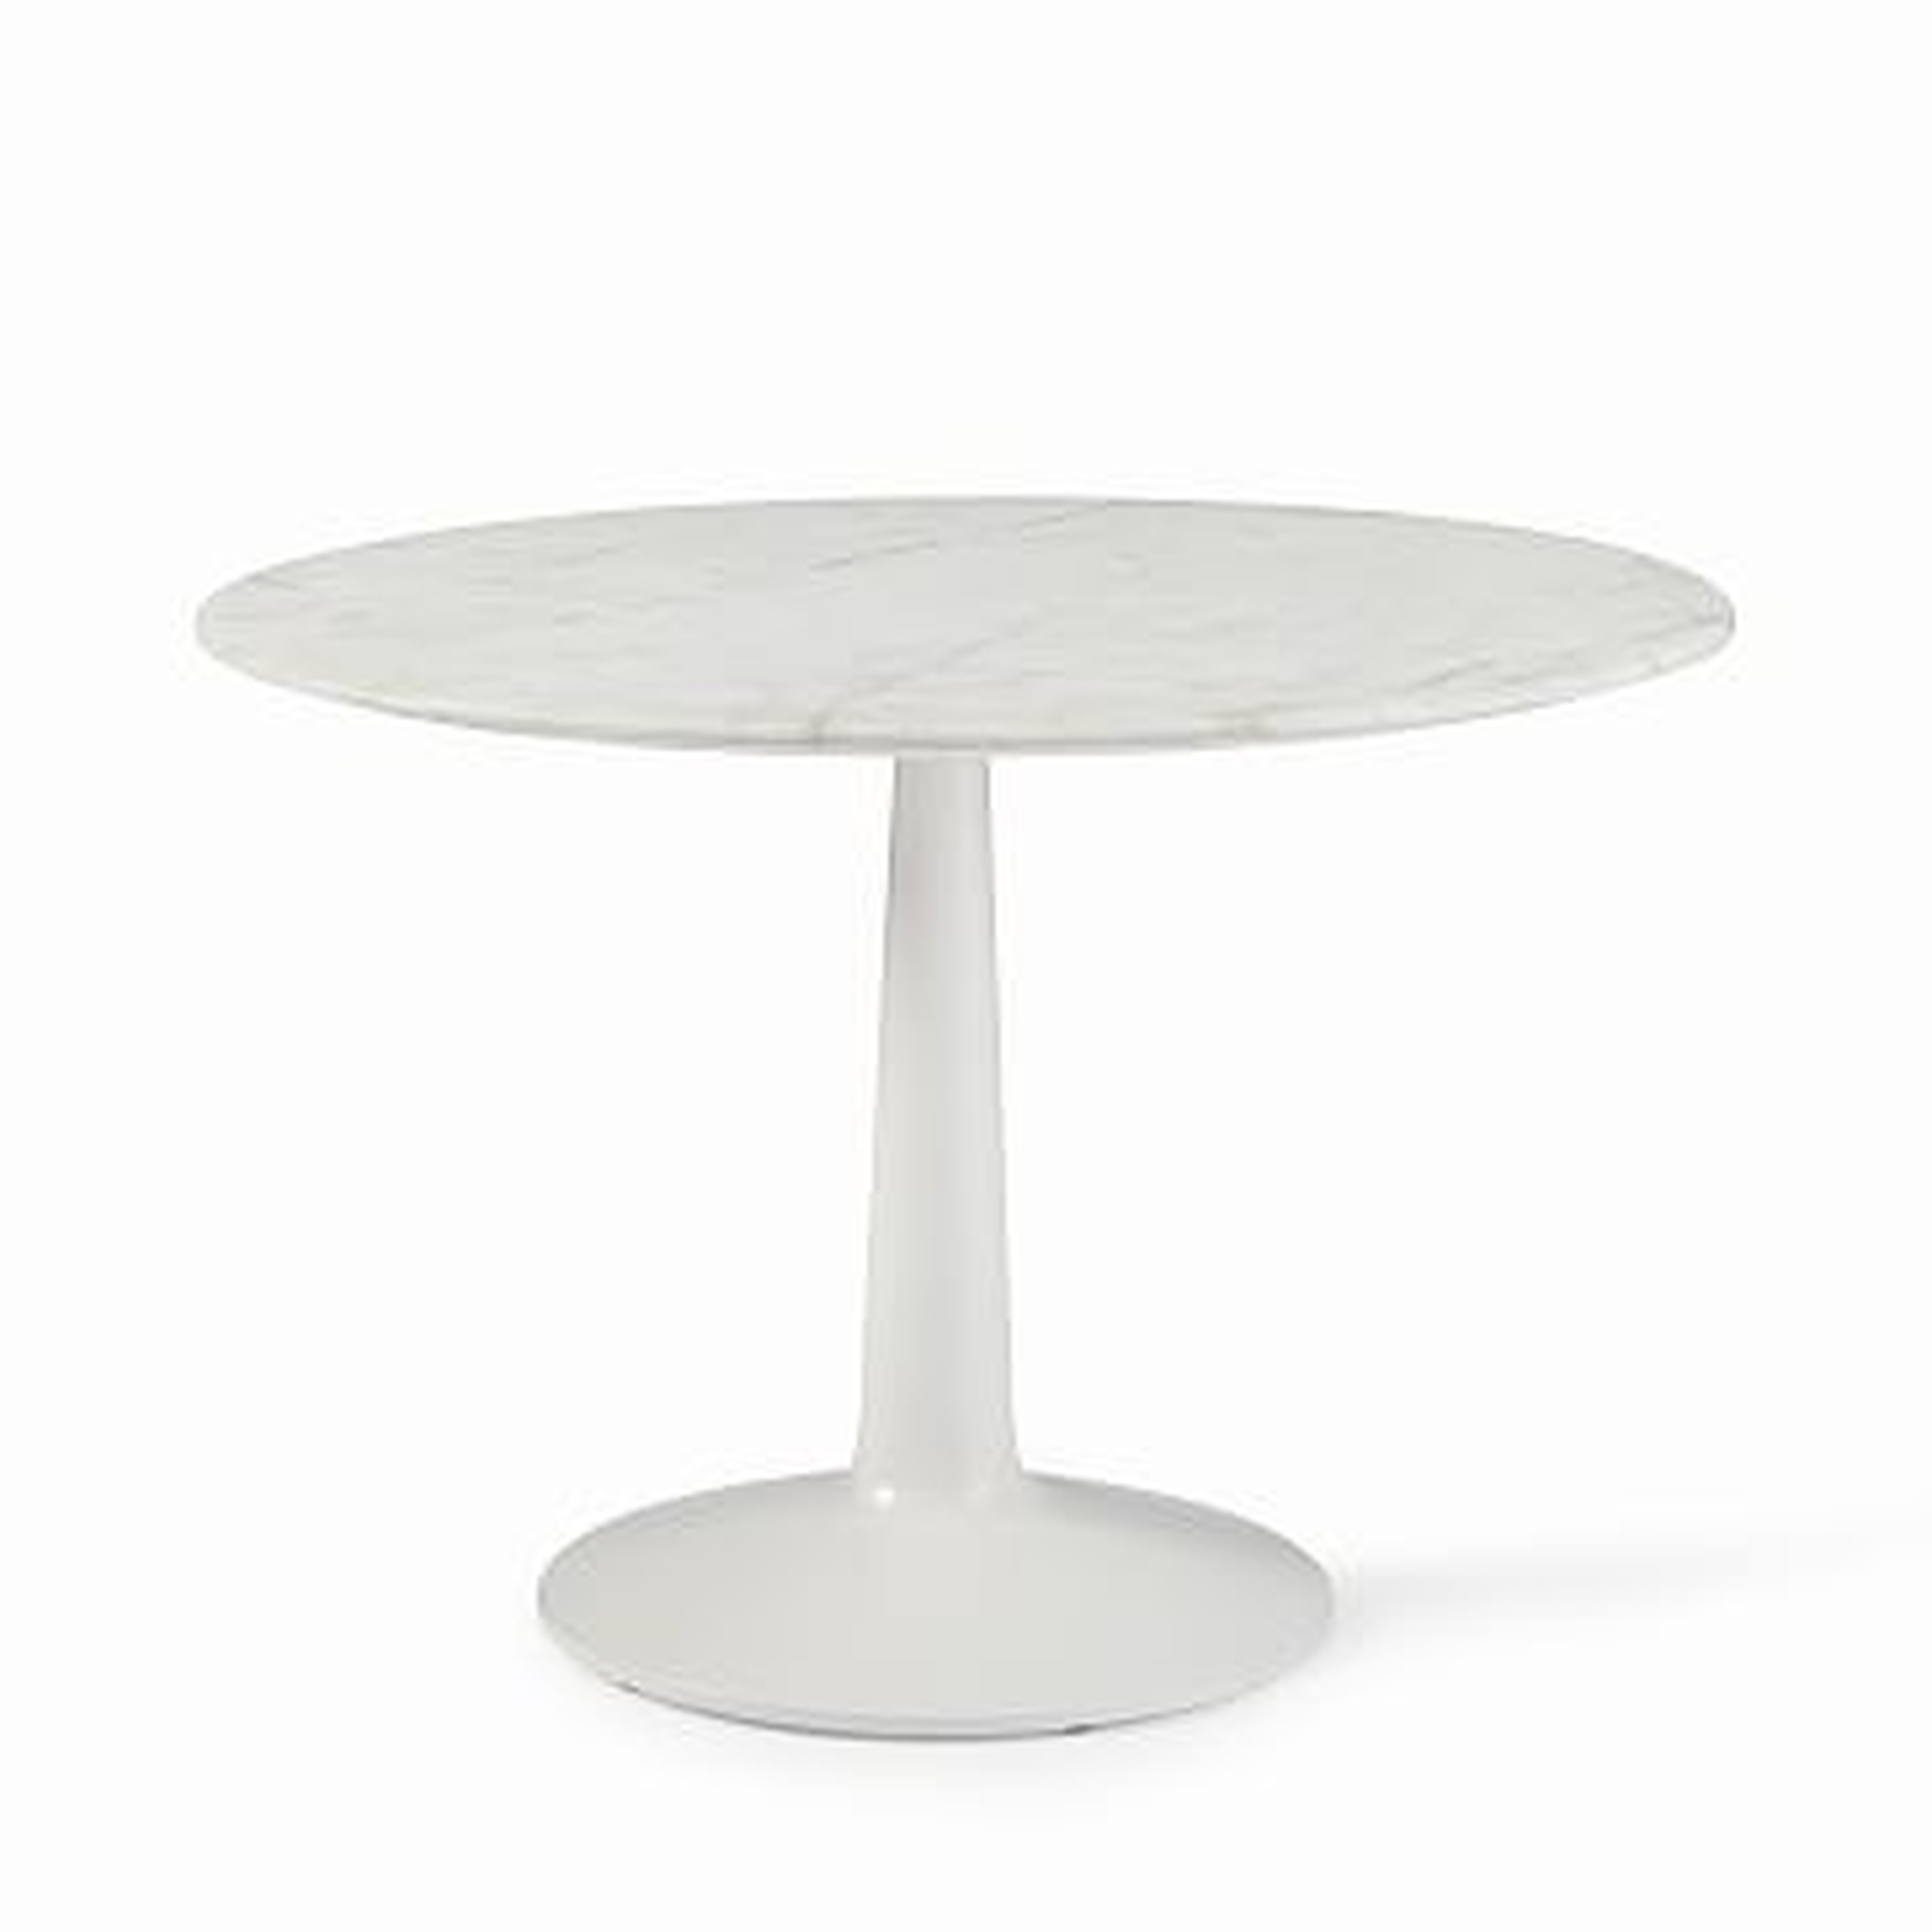 Liv Marble Round Dining Table, White Marble, White - West Elm